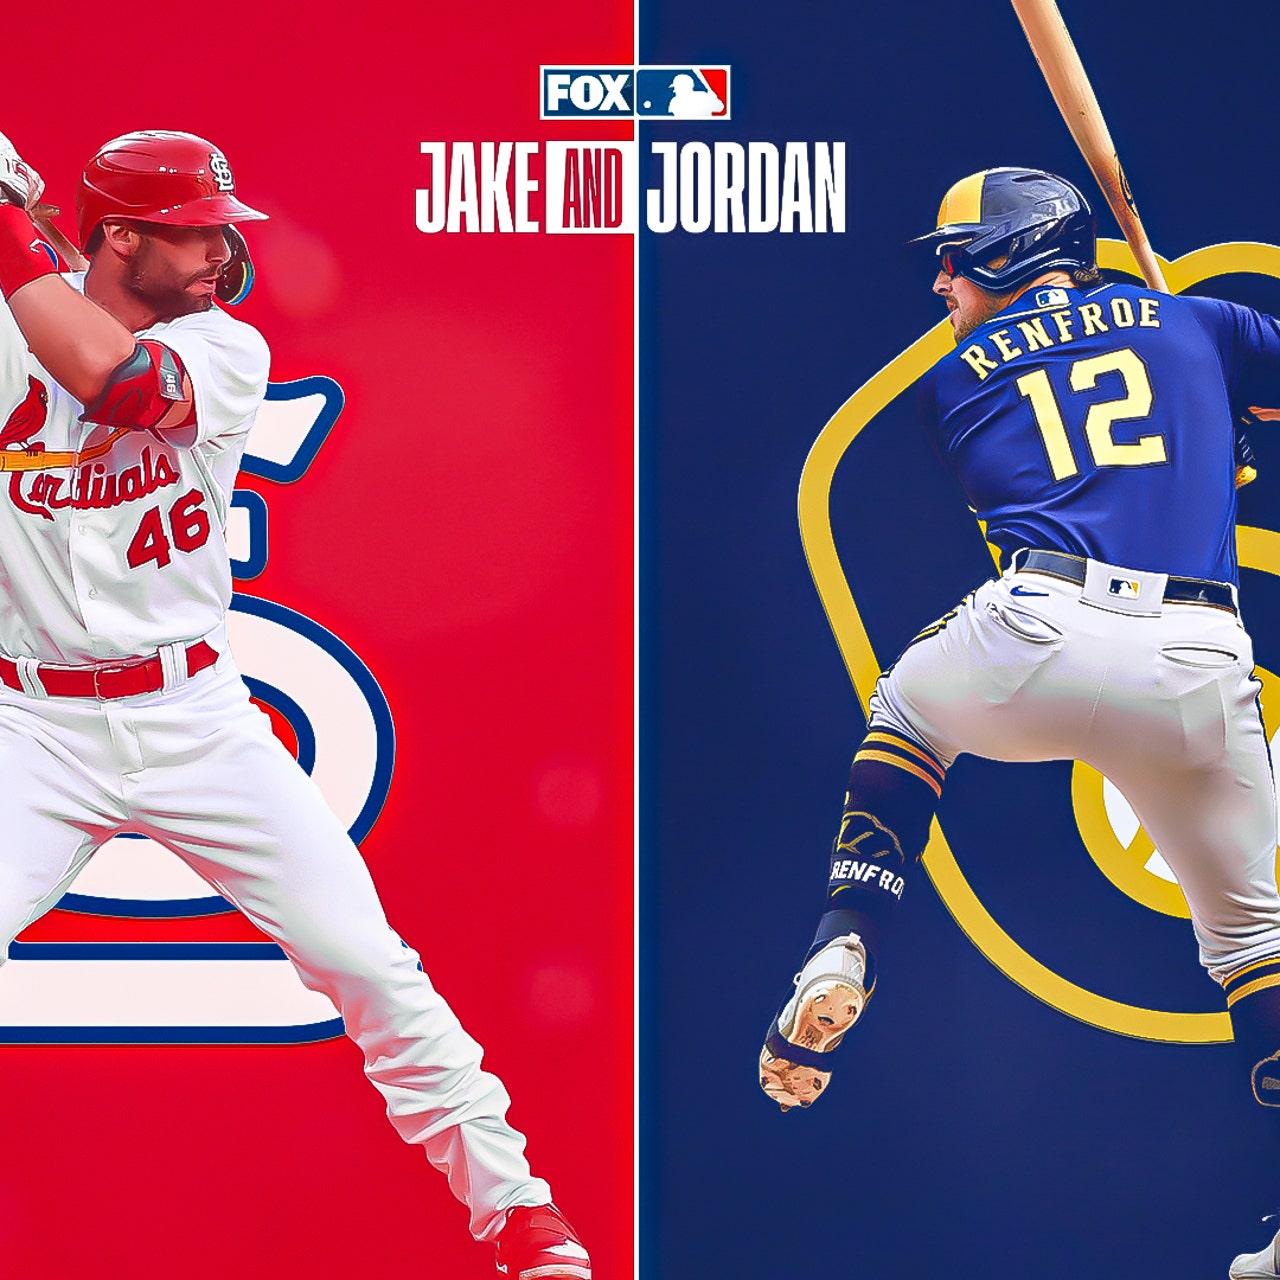 Cardinals vs. Brewers: Who wins in battle for the NL Central